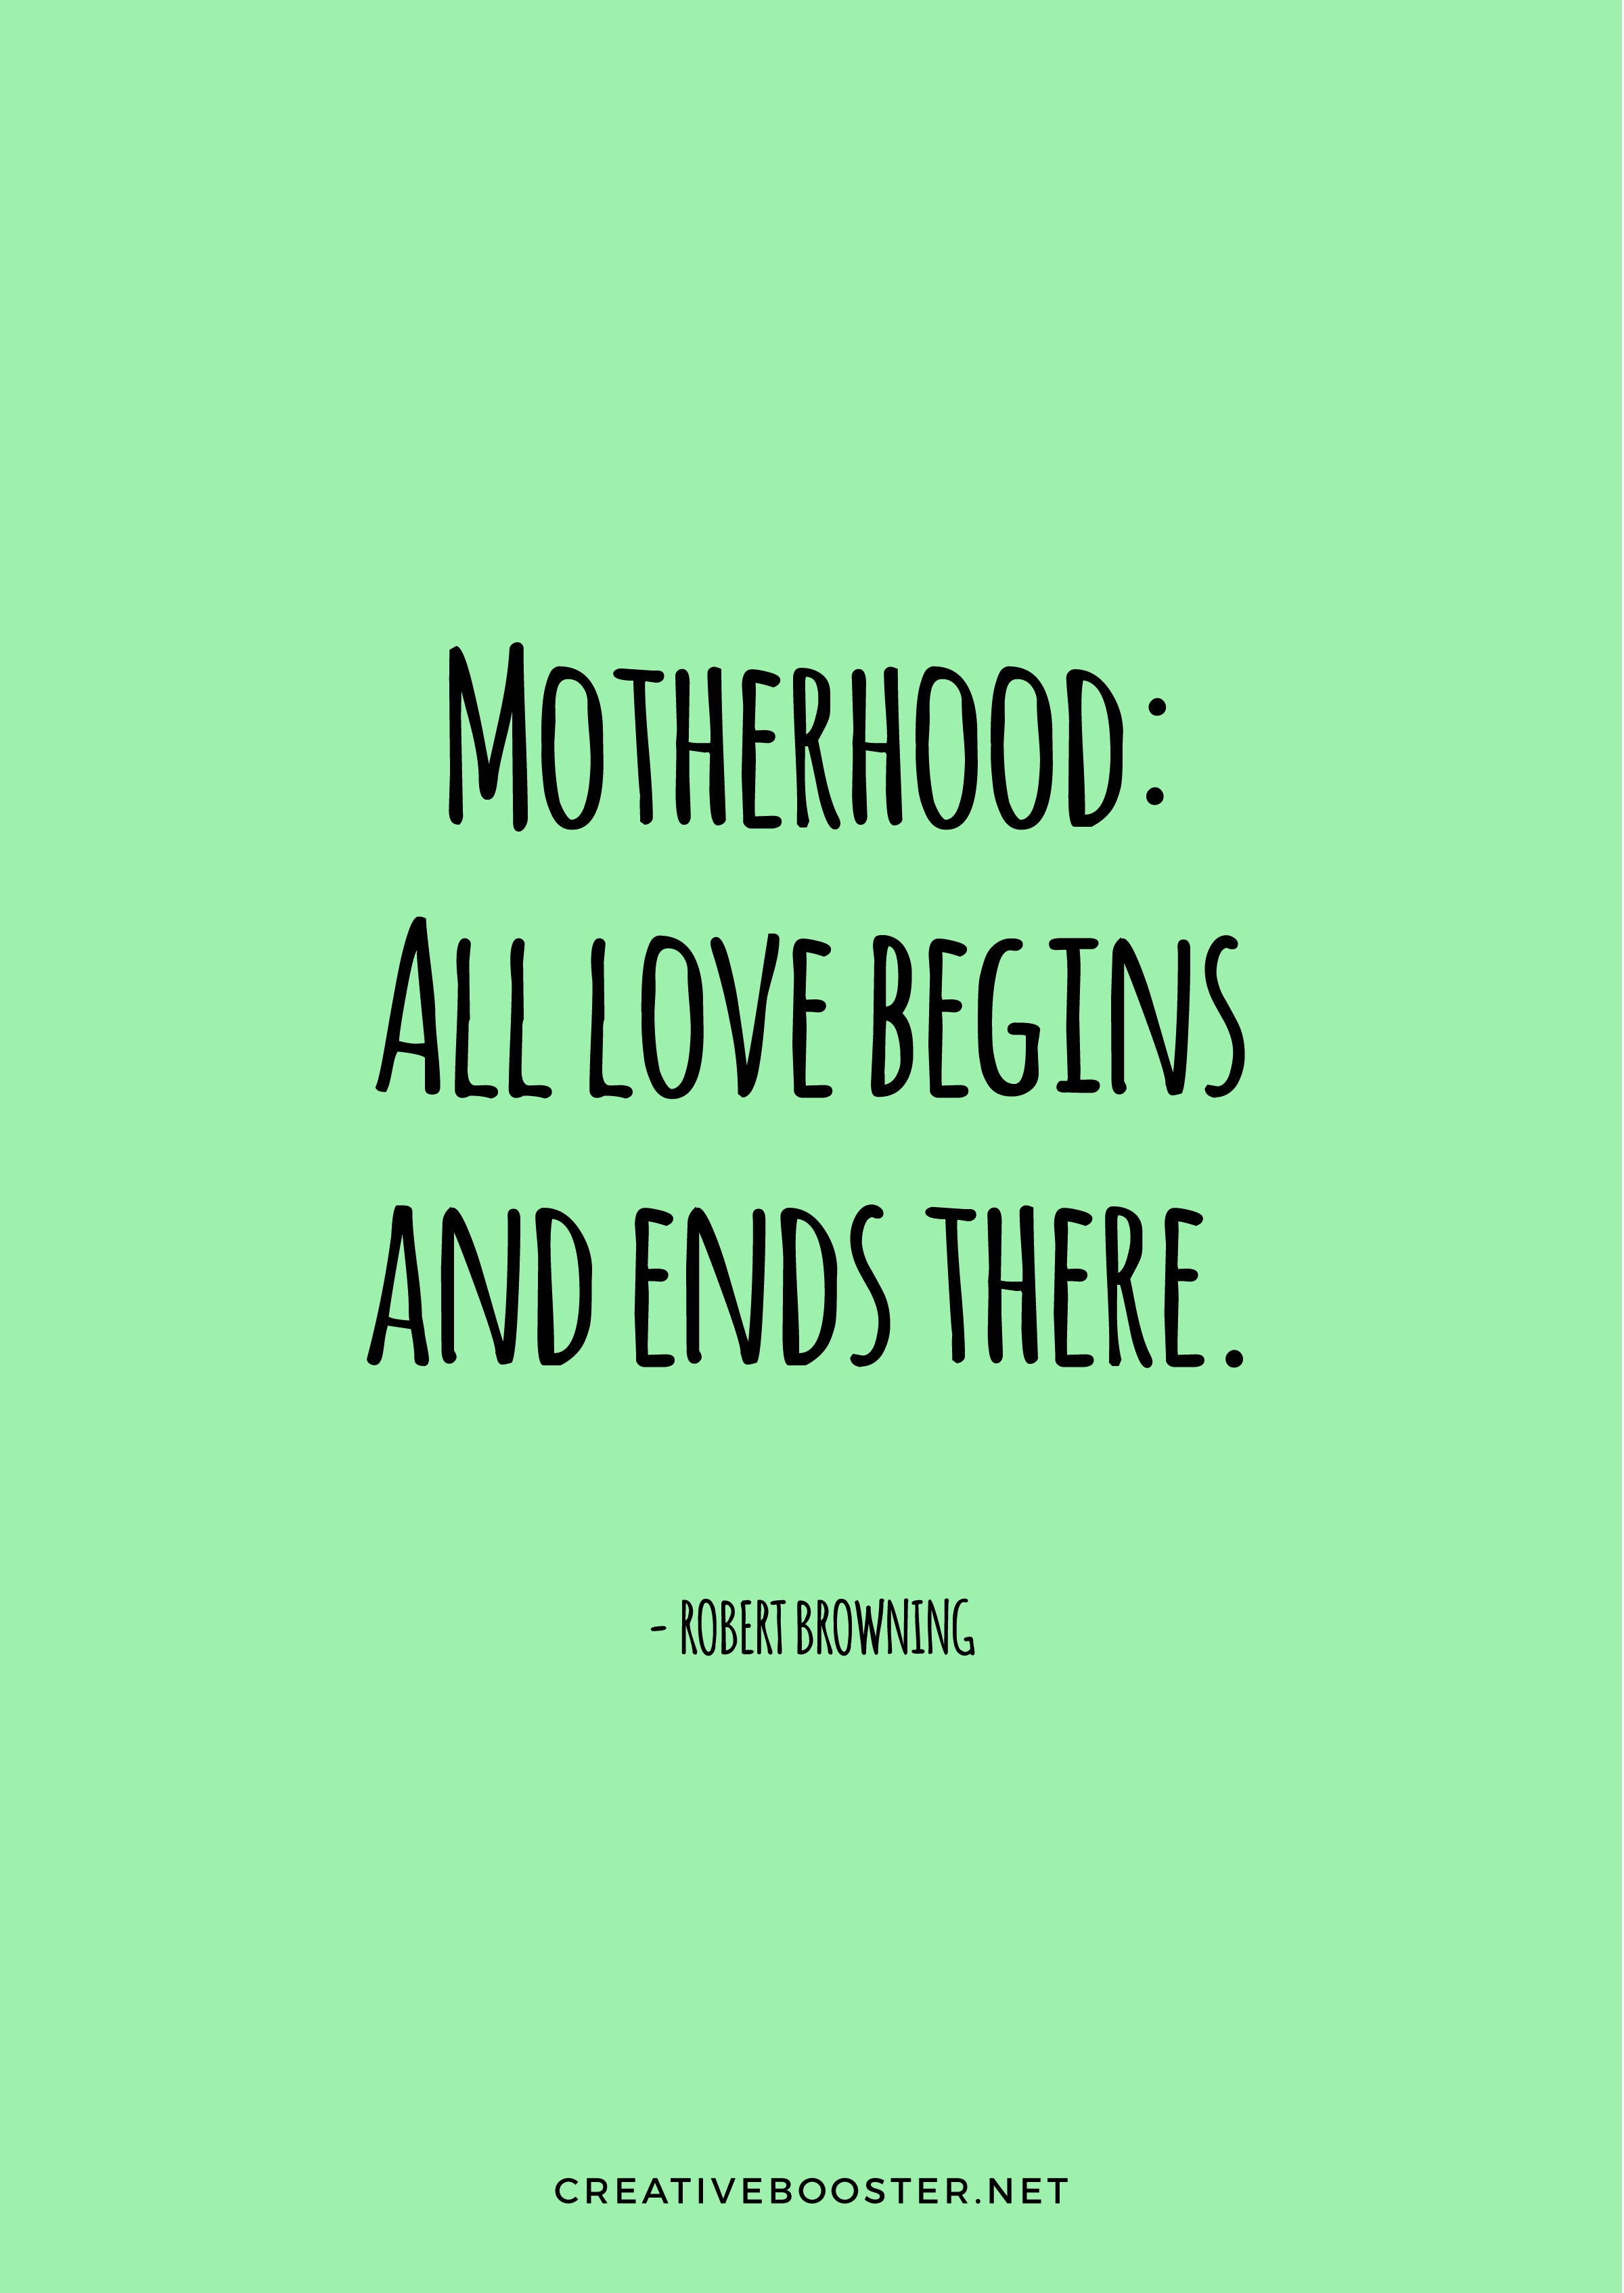 You-Got-This-Mama-Quotes-"Motherhood, All love begins and ends there." - Robert Browning (Quote Art Print)